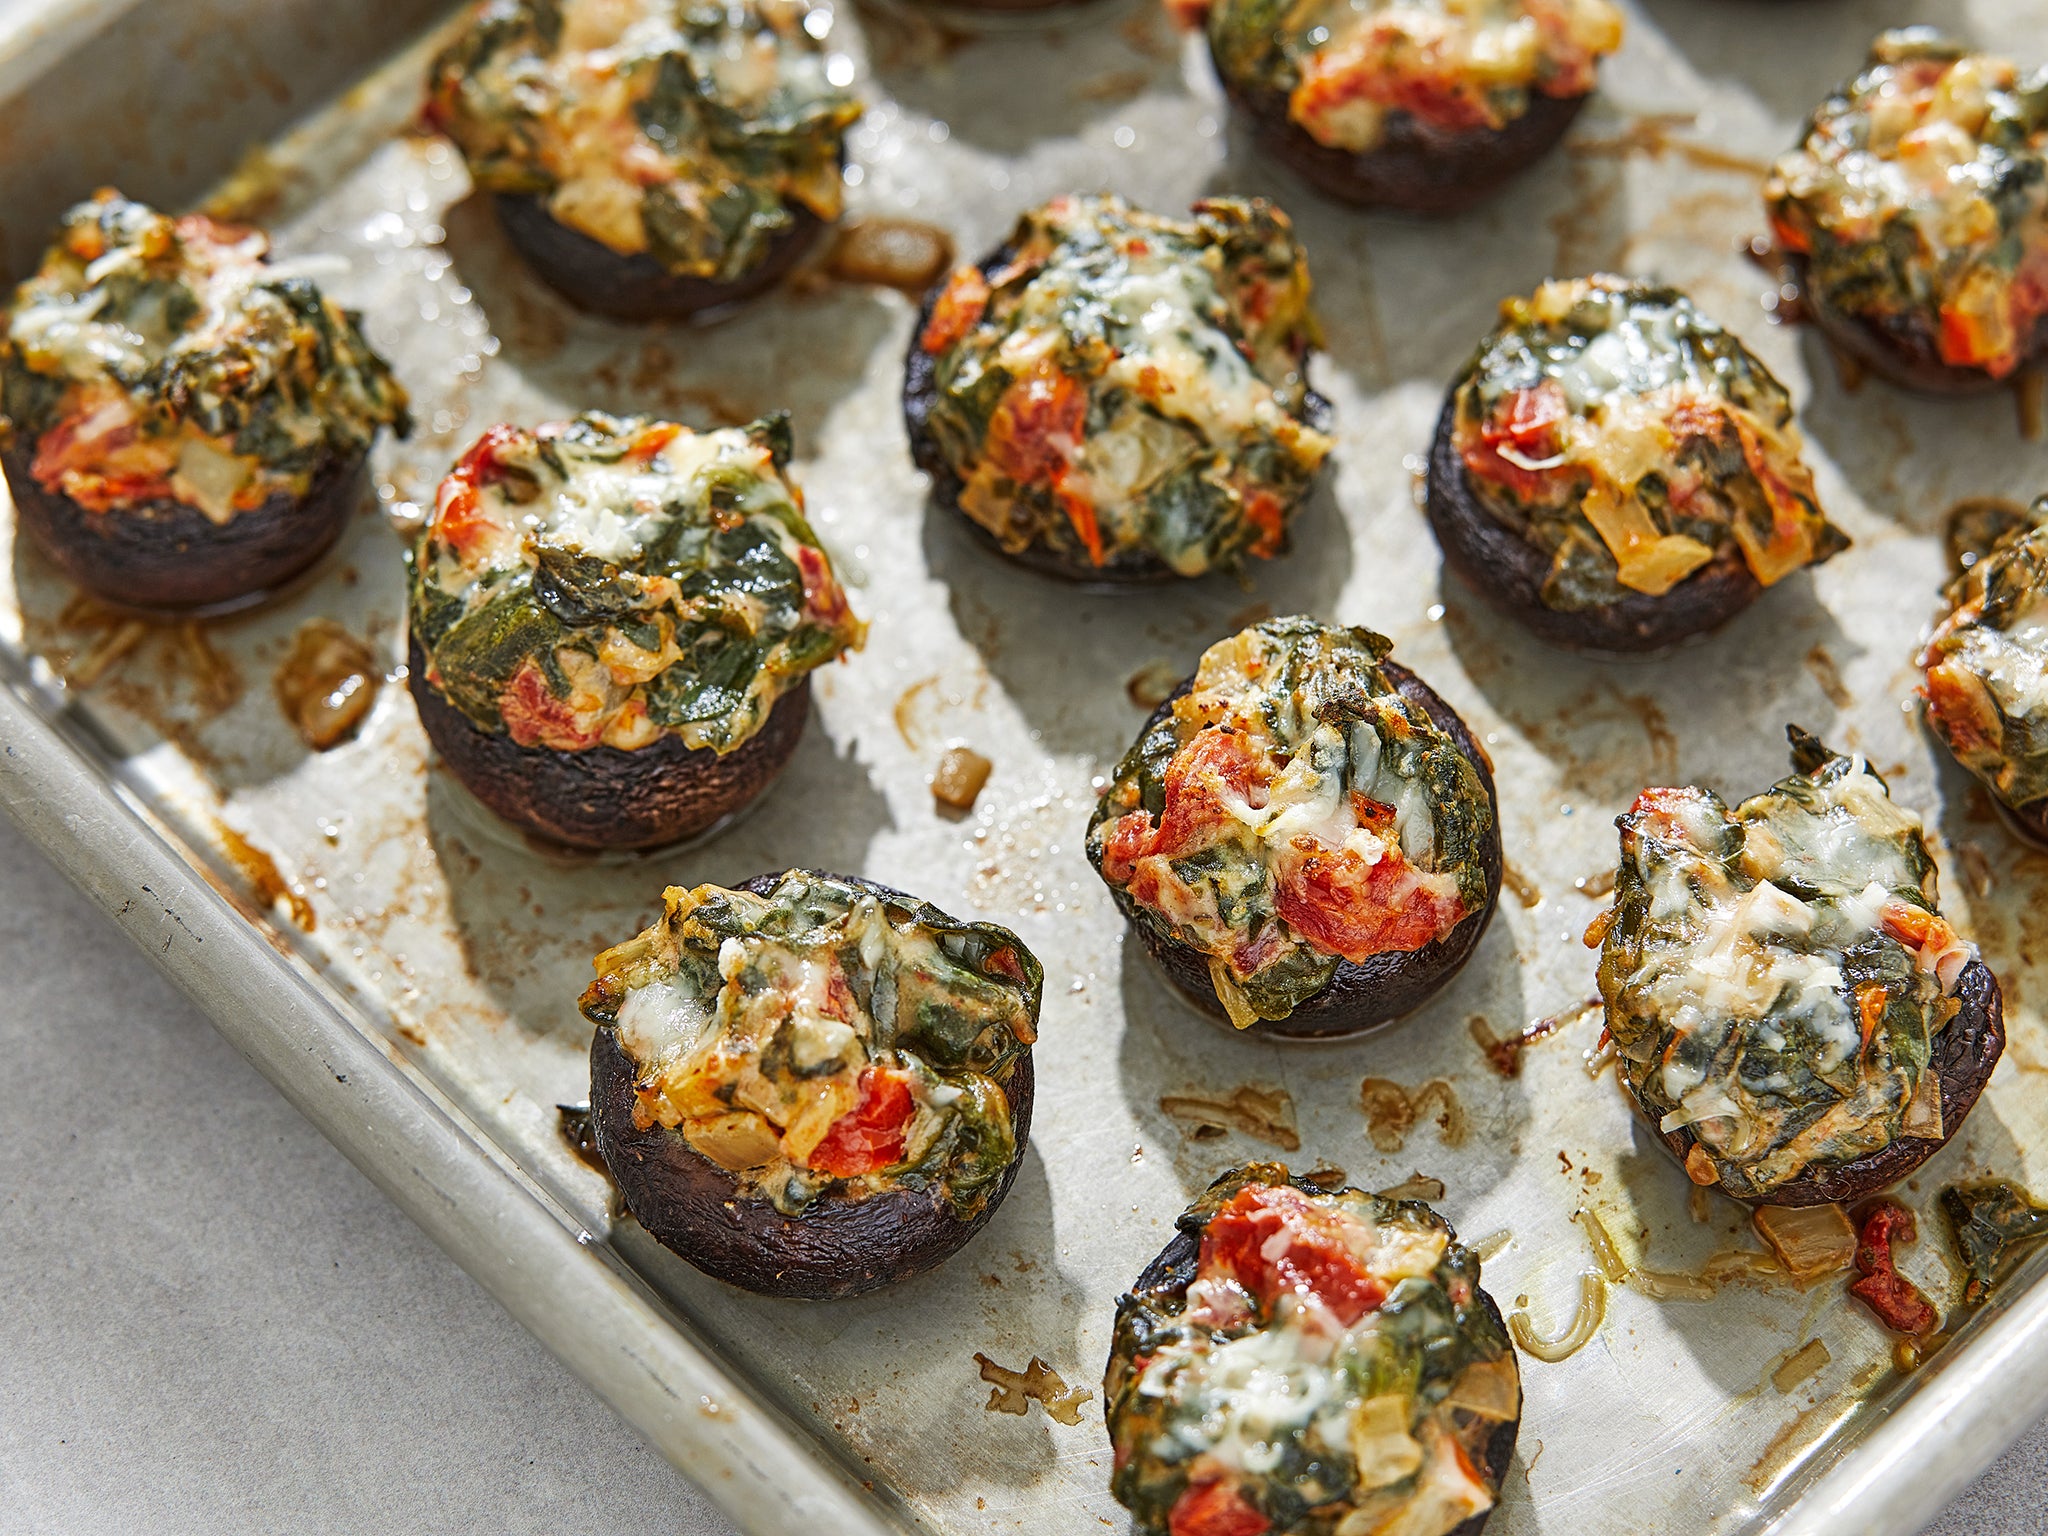 These veggie snacks will get everyone talking